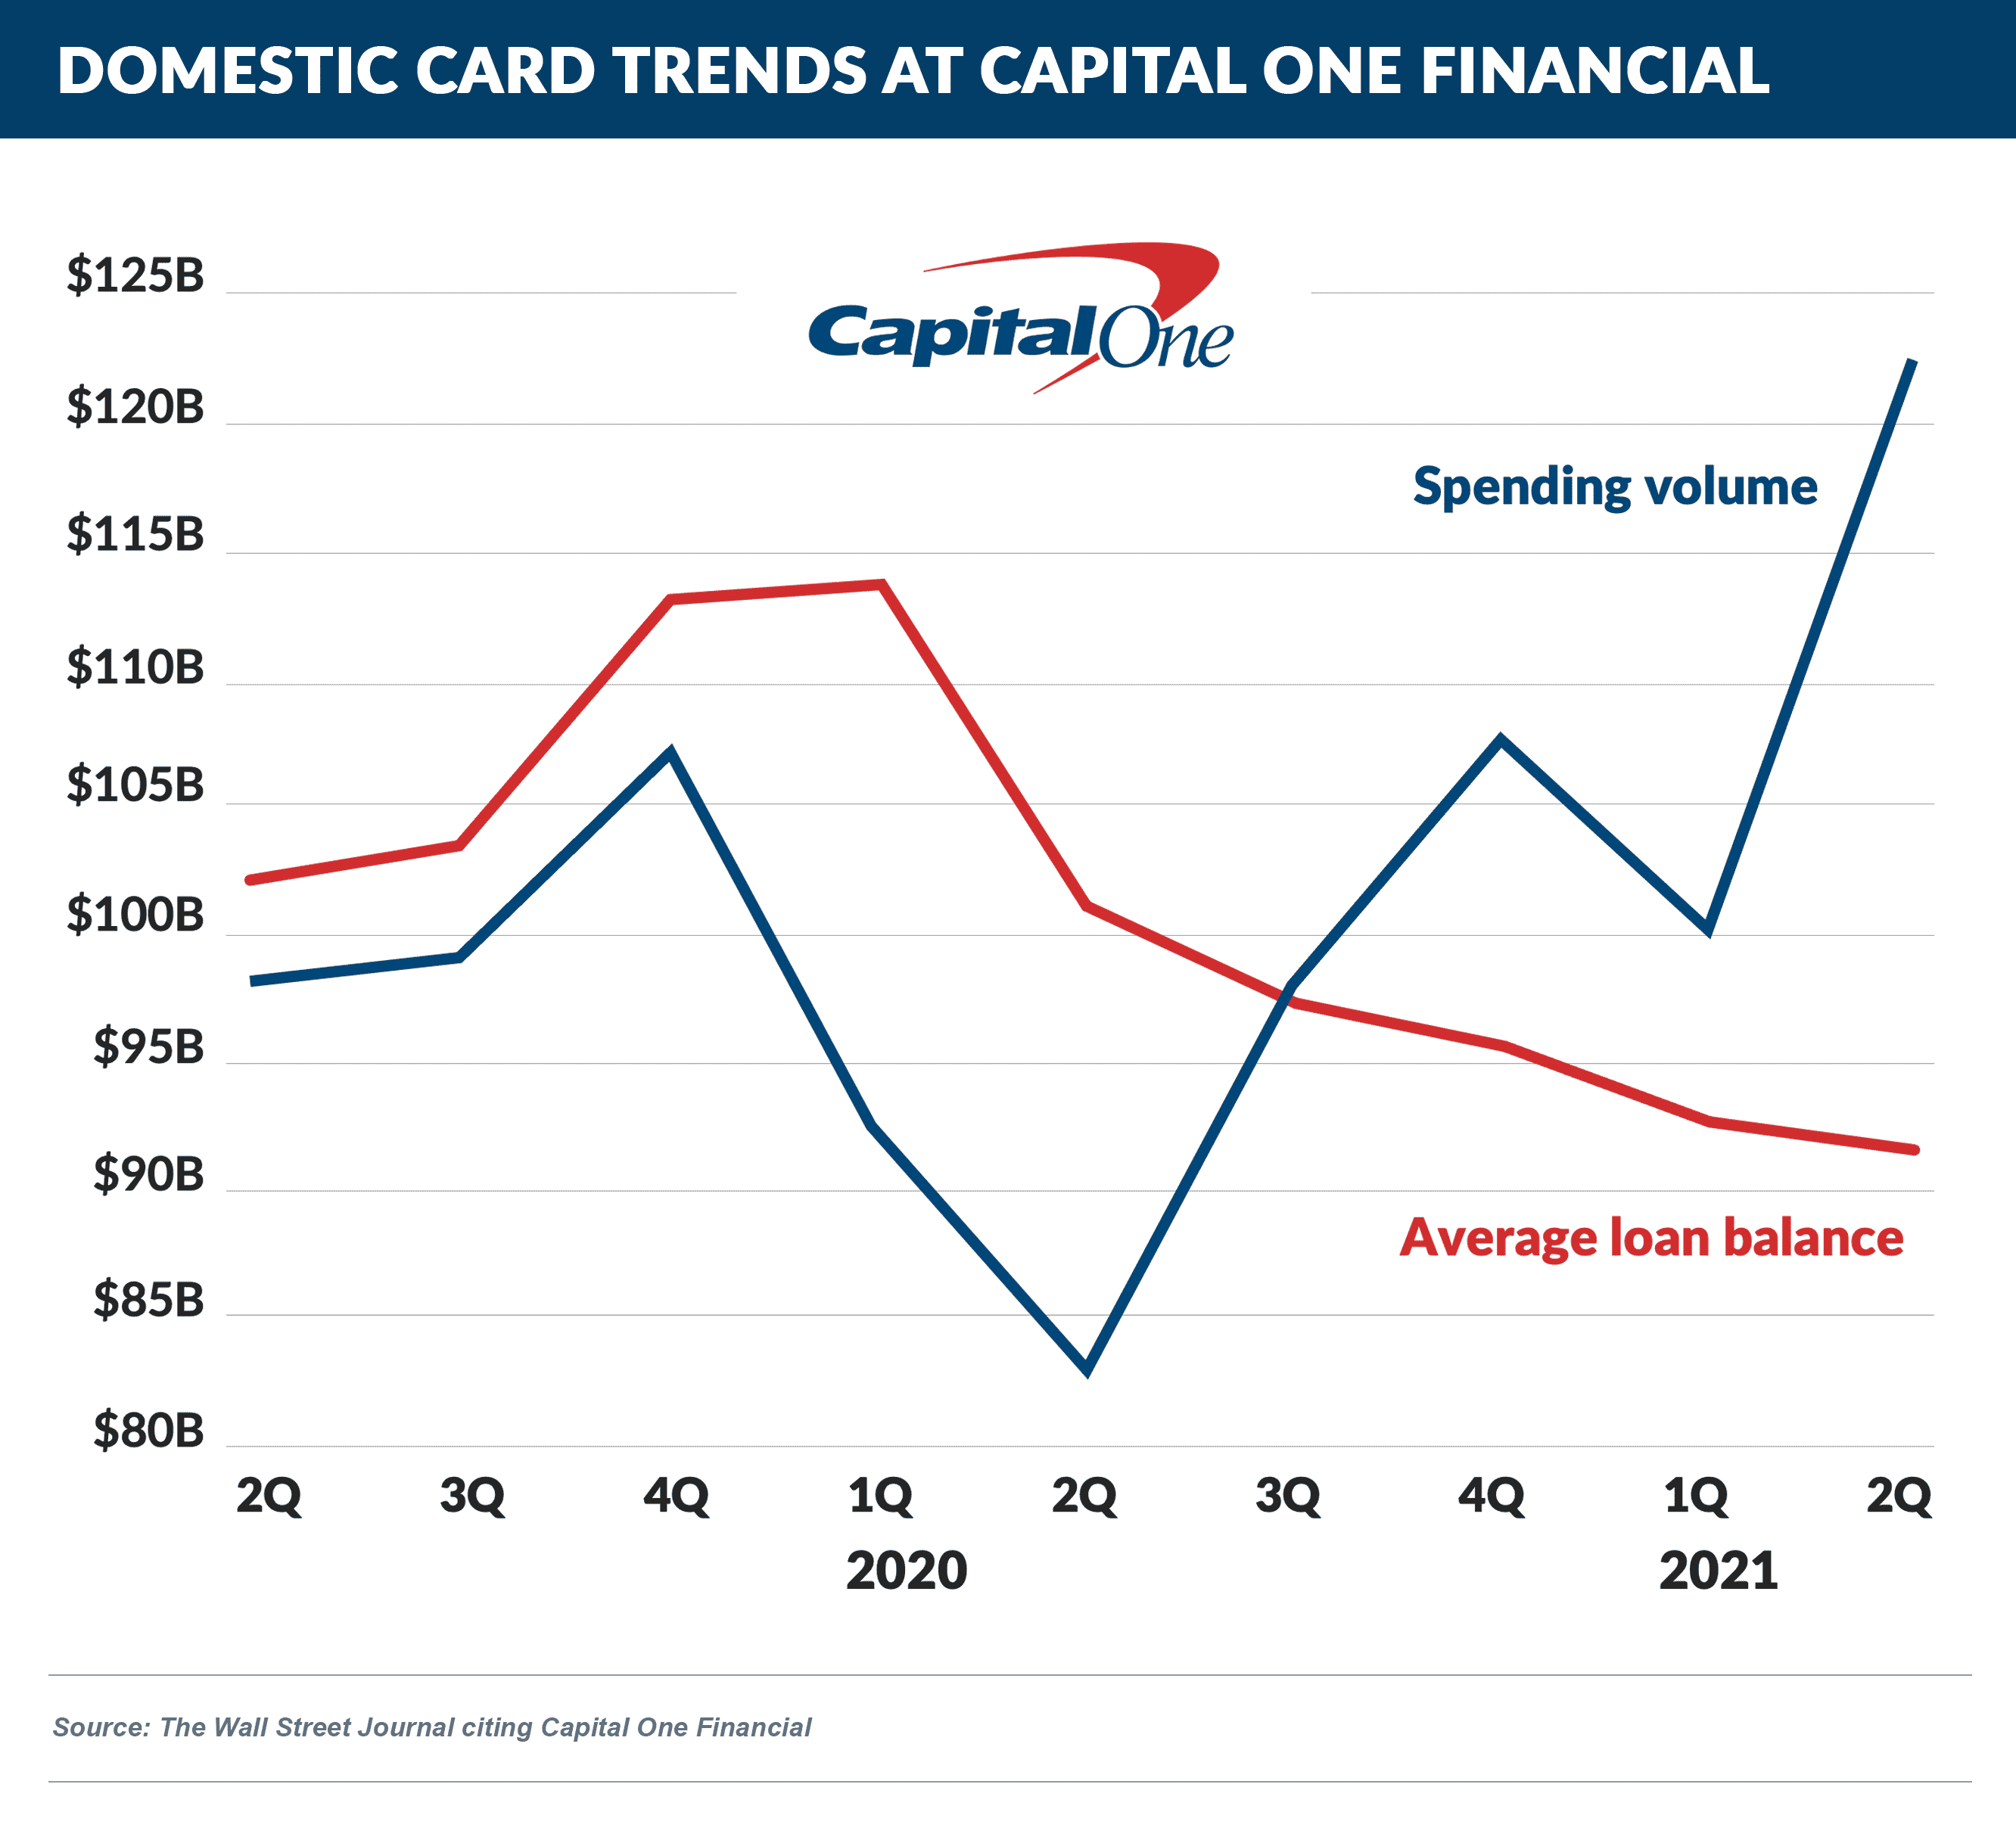 Domestic Card trends at Capital One Financial